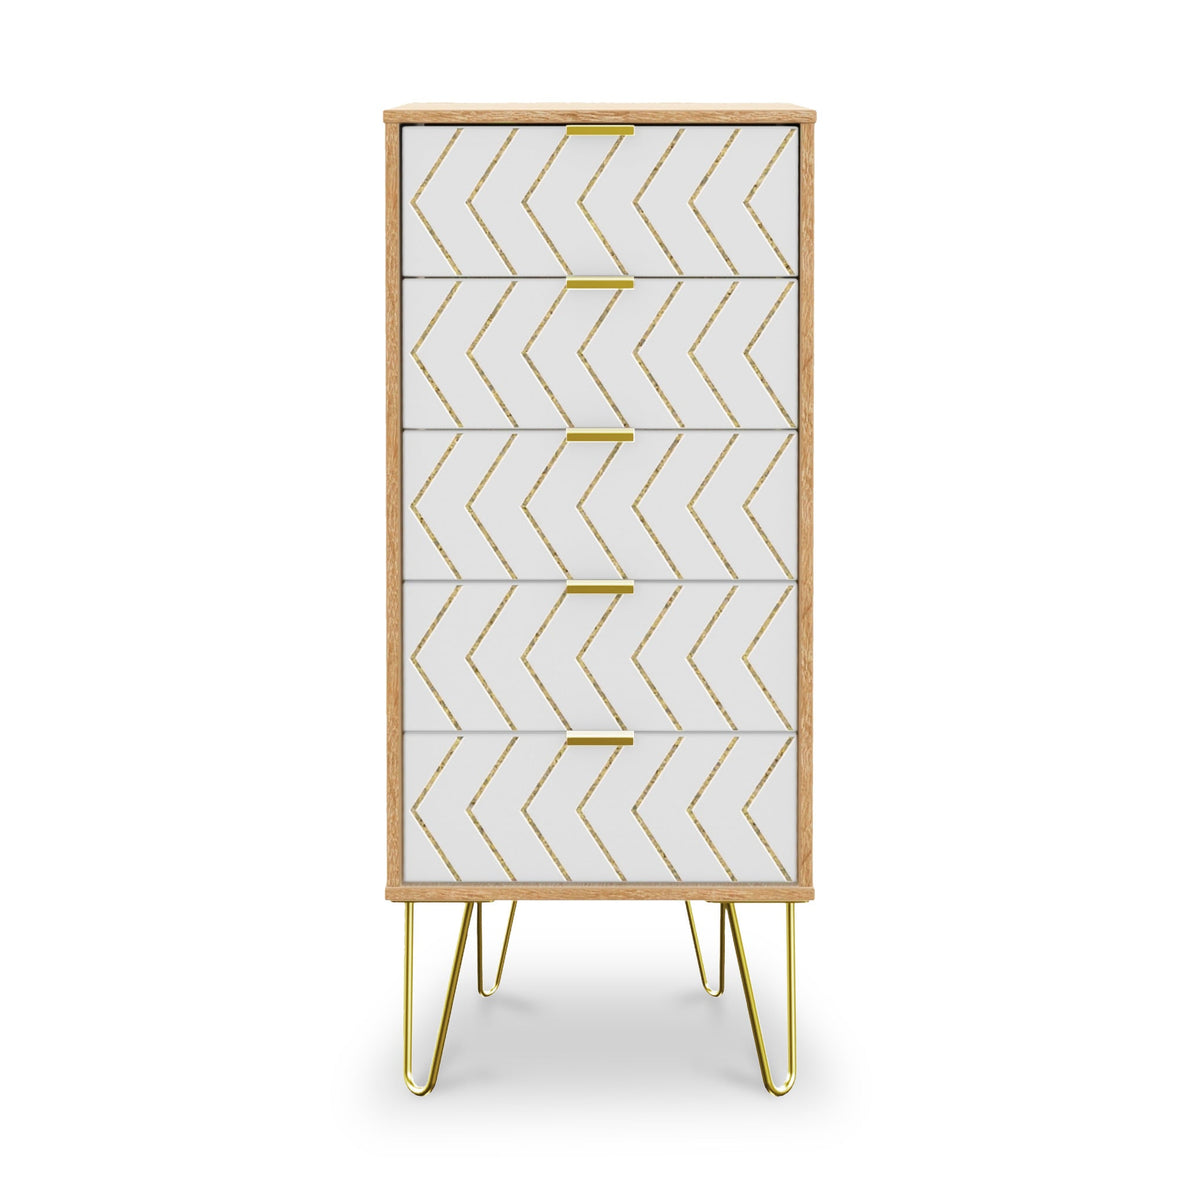 Mila White with Gold Hairpin Legs 5 Drawer Tallboy from Roseland